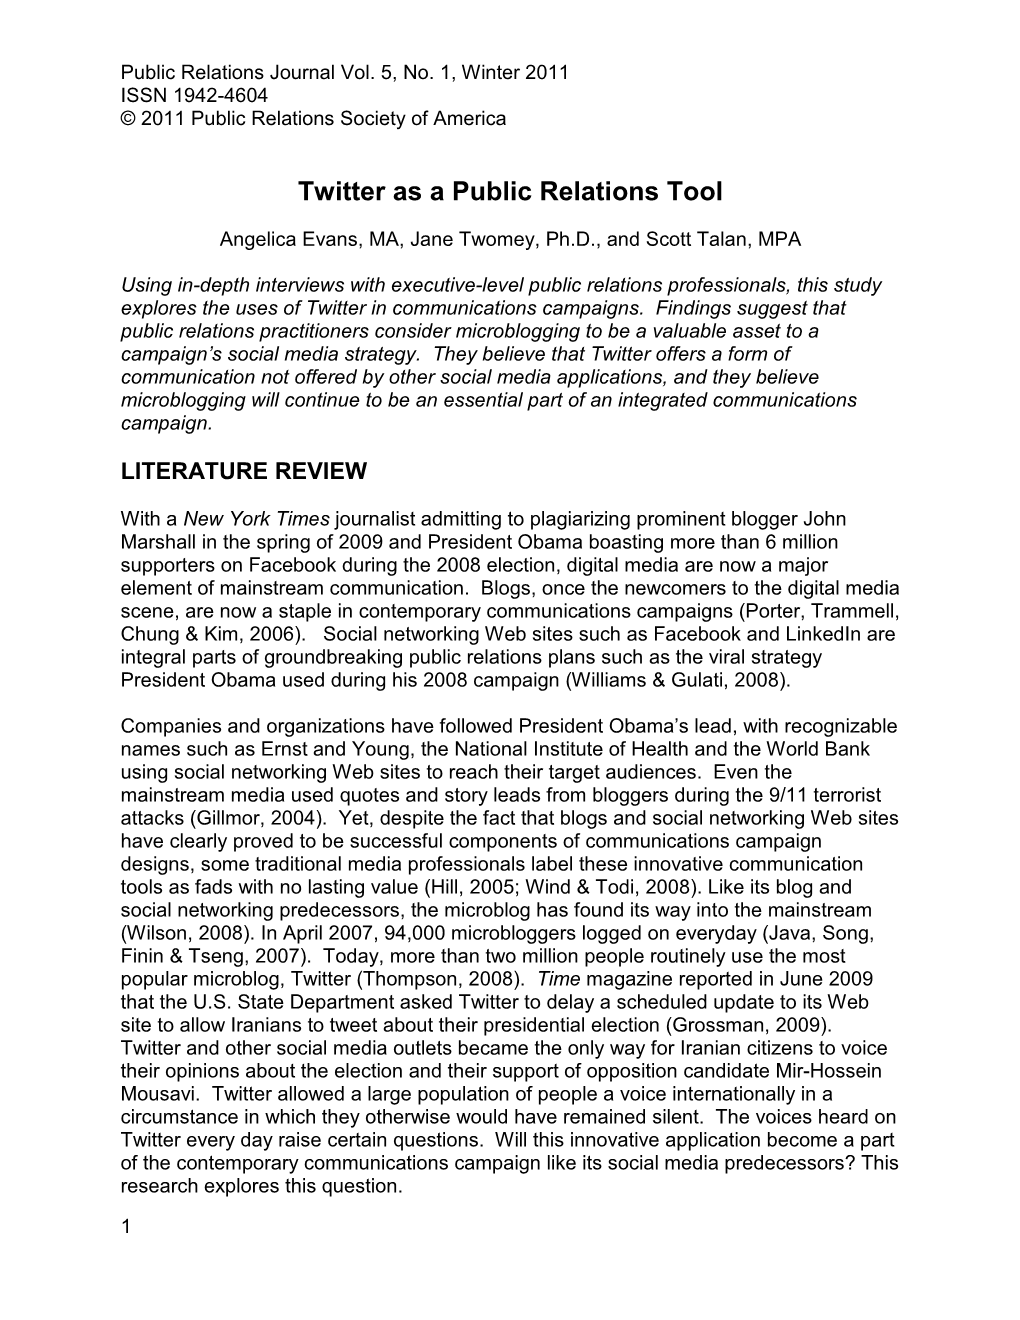 Twitter As a Public Relations Tool